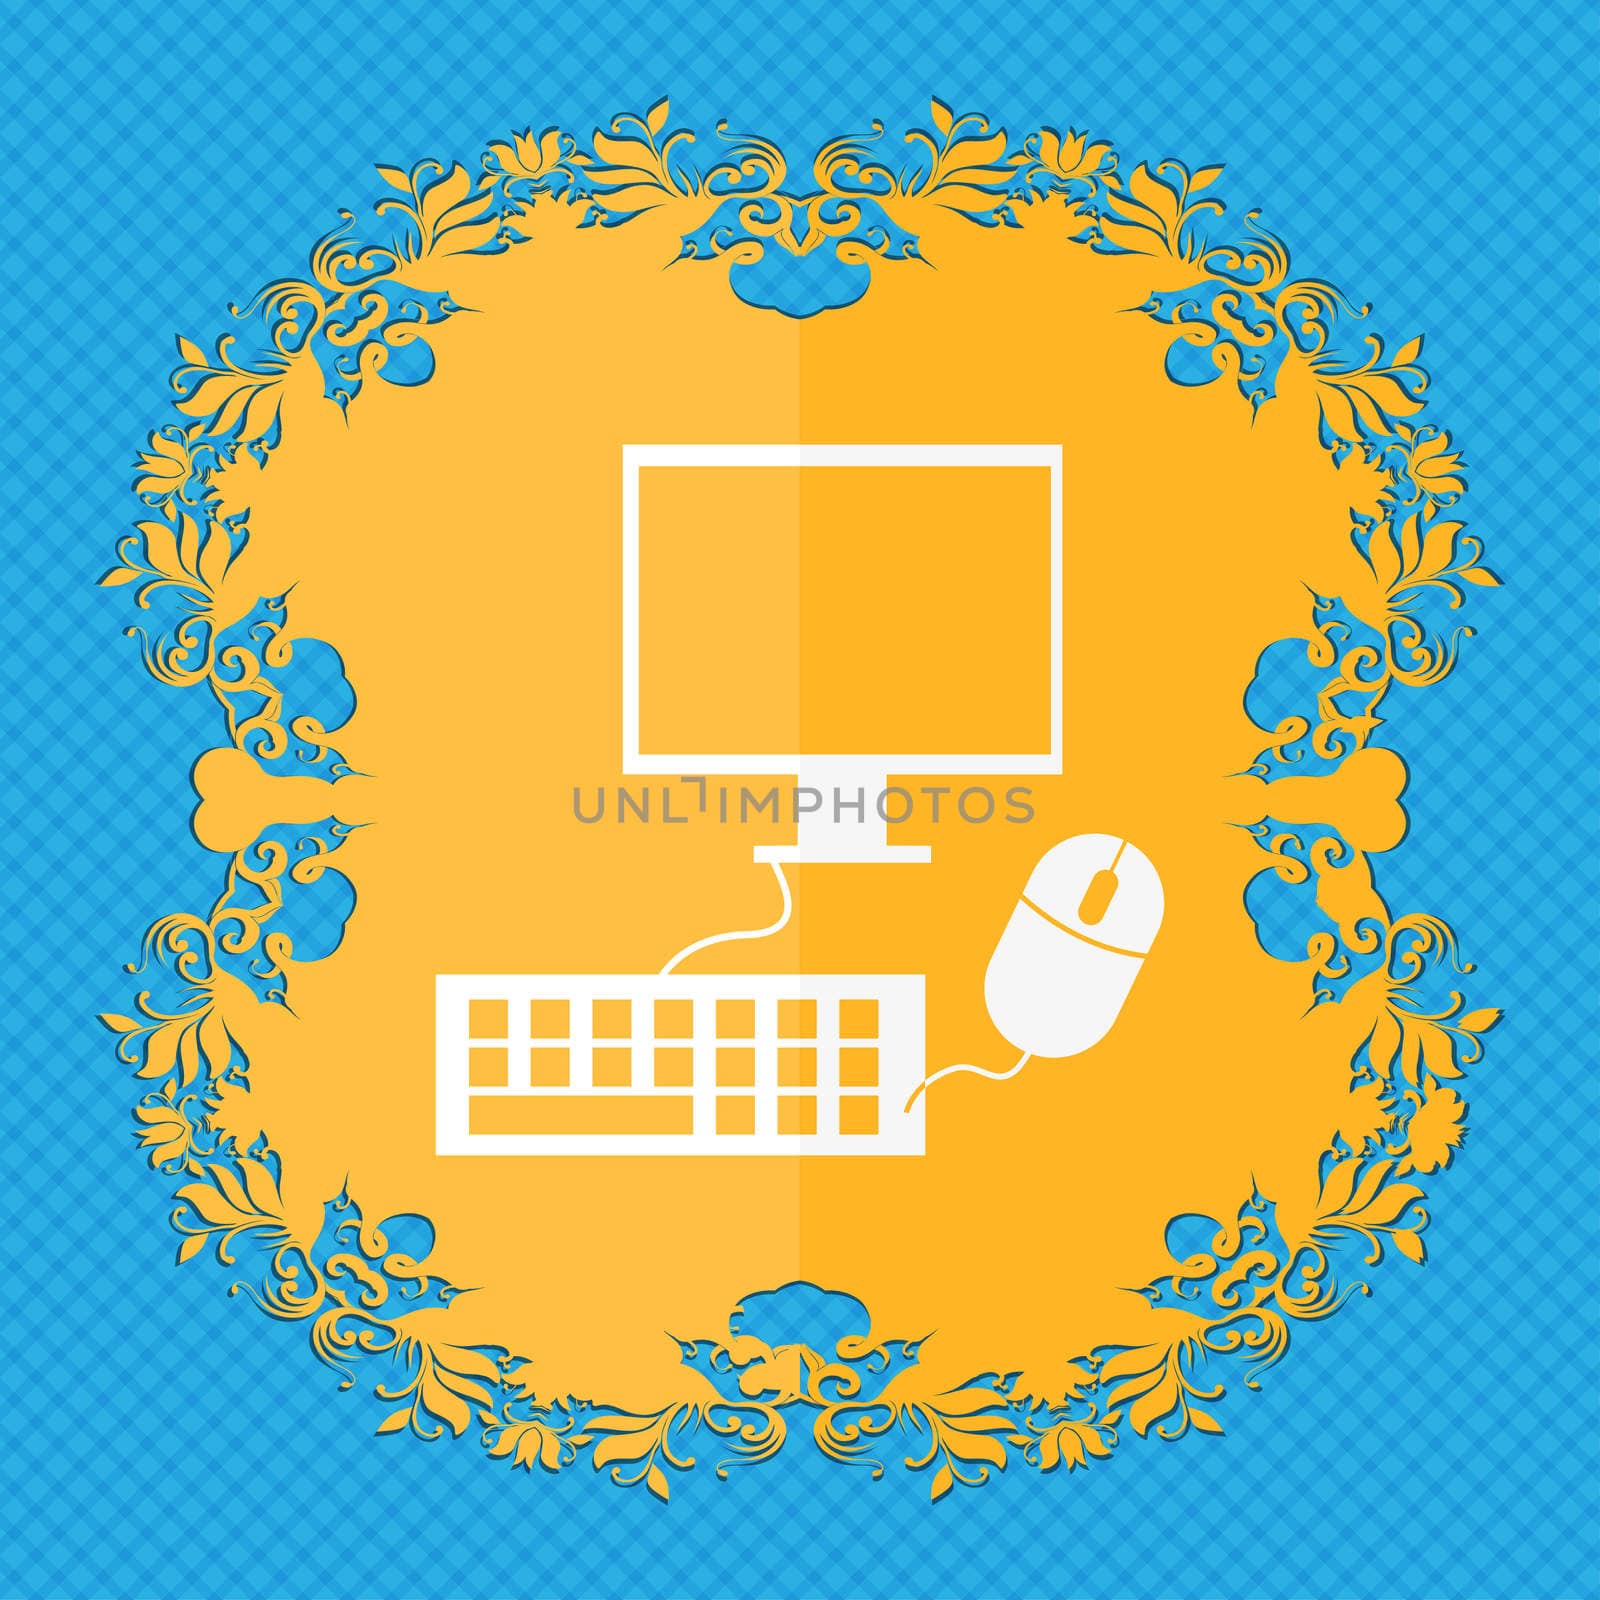 Computer widescreen monitor, keyboard, mouse sign icon. Floral flat design on a blue abstract background with place for your text. illustration